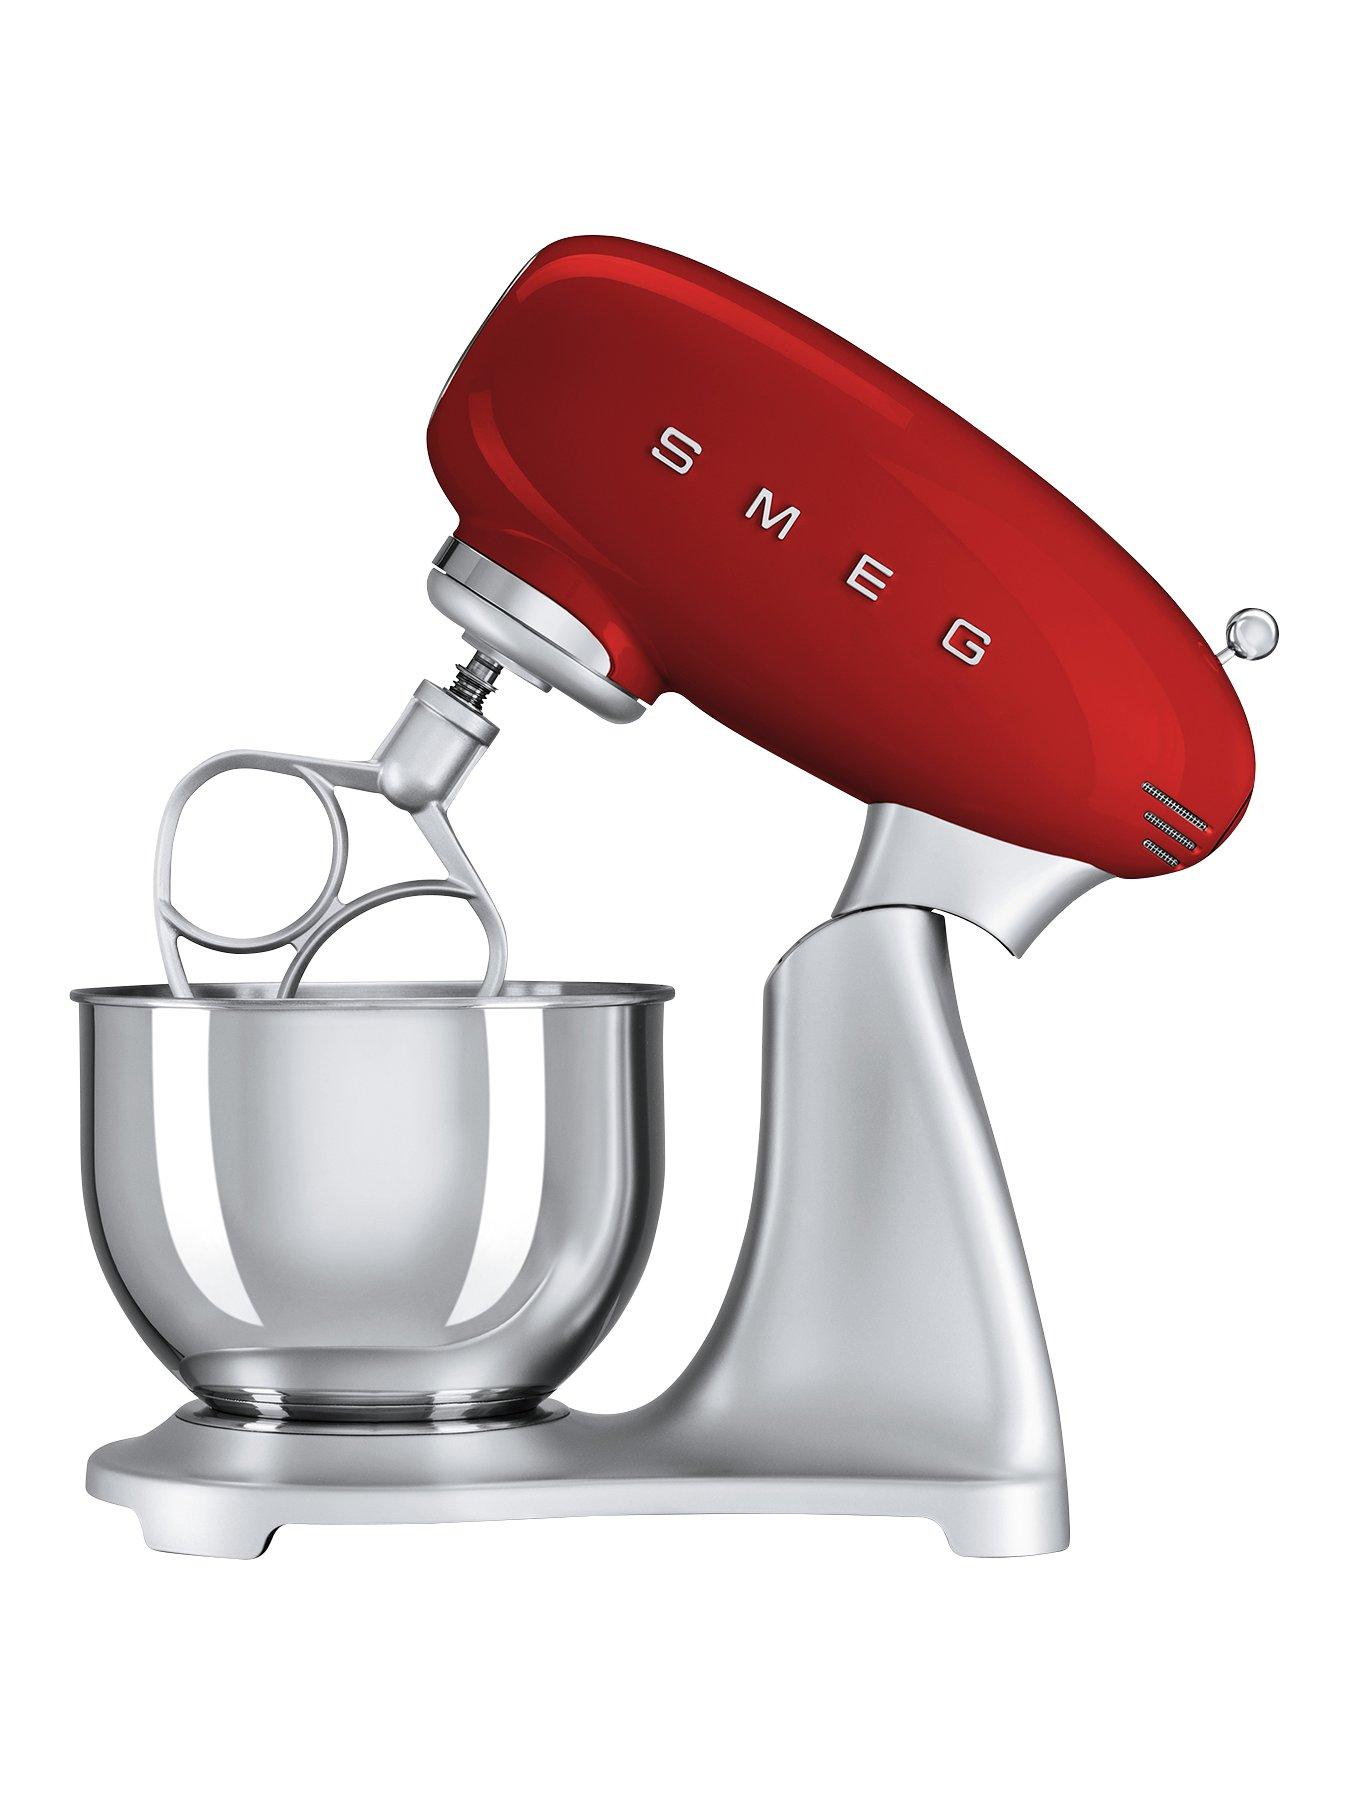 Smeg Smf01 Stand Mixer - Red Review thumbnail